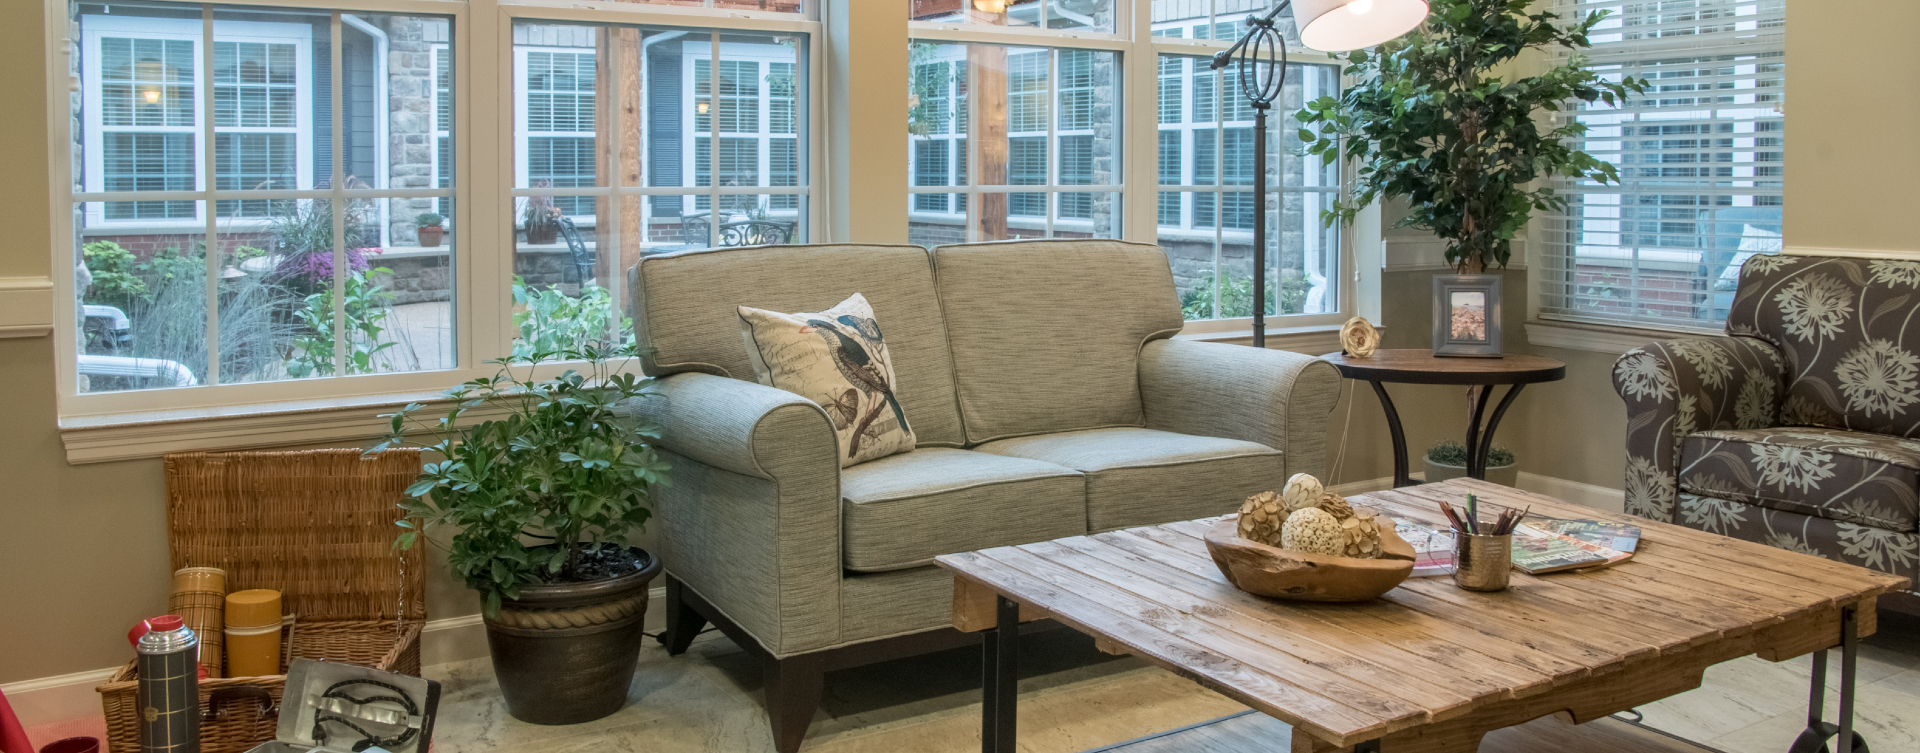 Relax in the warmth of the sunroom at Bickford of Spotsylvania